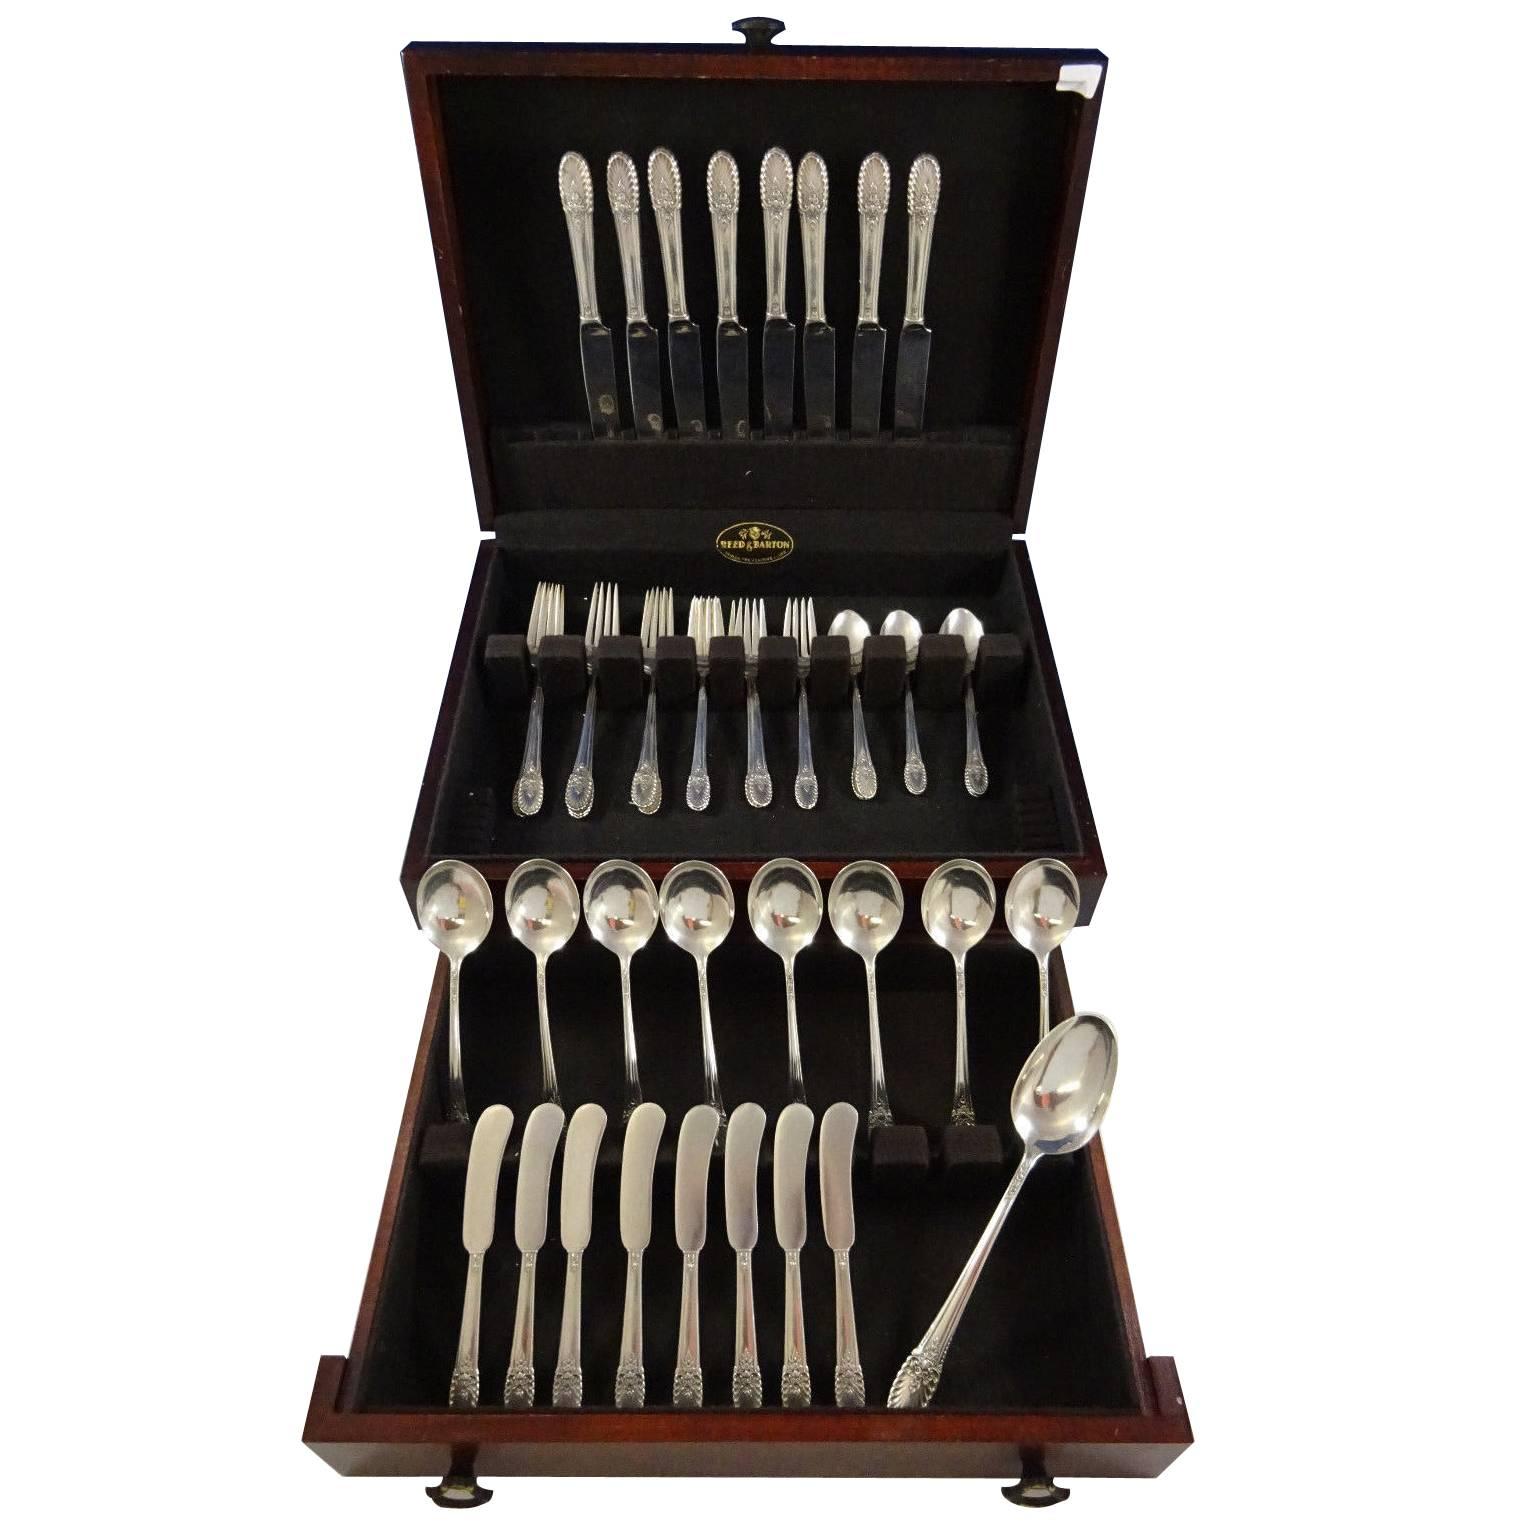 Beautiful Riviera by International sterling silver flatware set of 49 pieces. This set includes:

Eight knives, 9 1/4